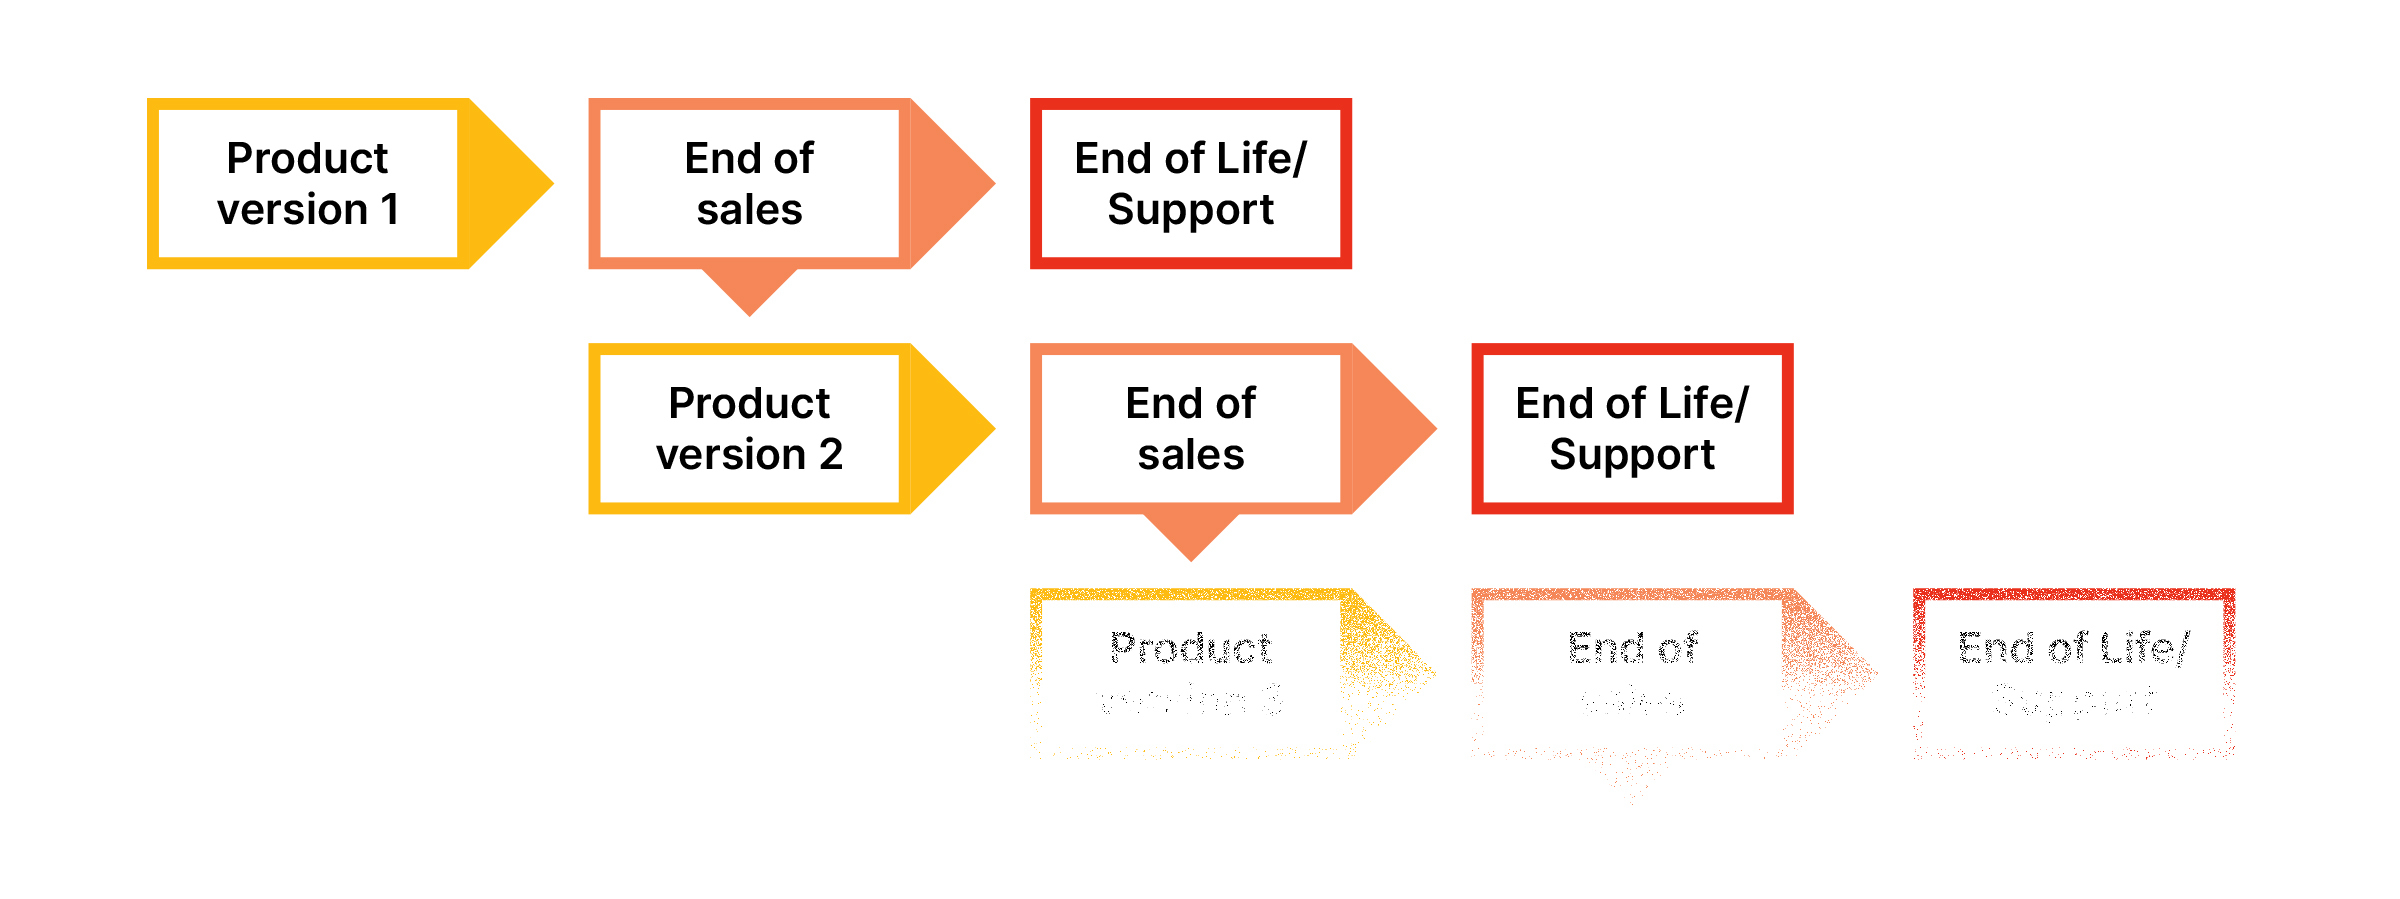 An infographic displaying the lifecycle of software from the first version of a product to its end of sales to its end of life/support while the subsequent product version follows.